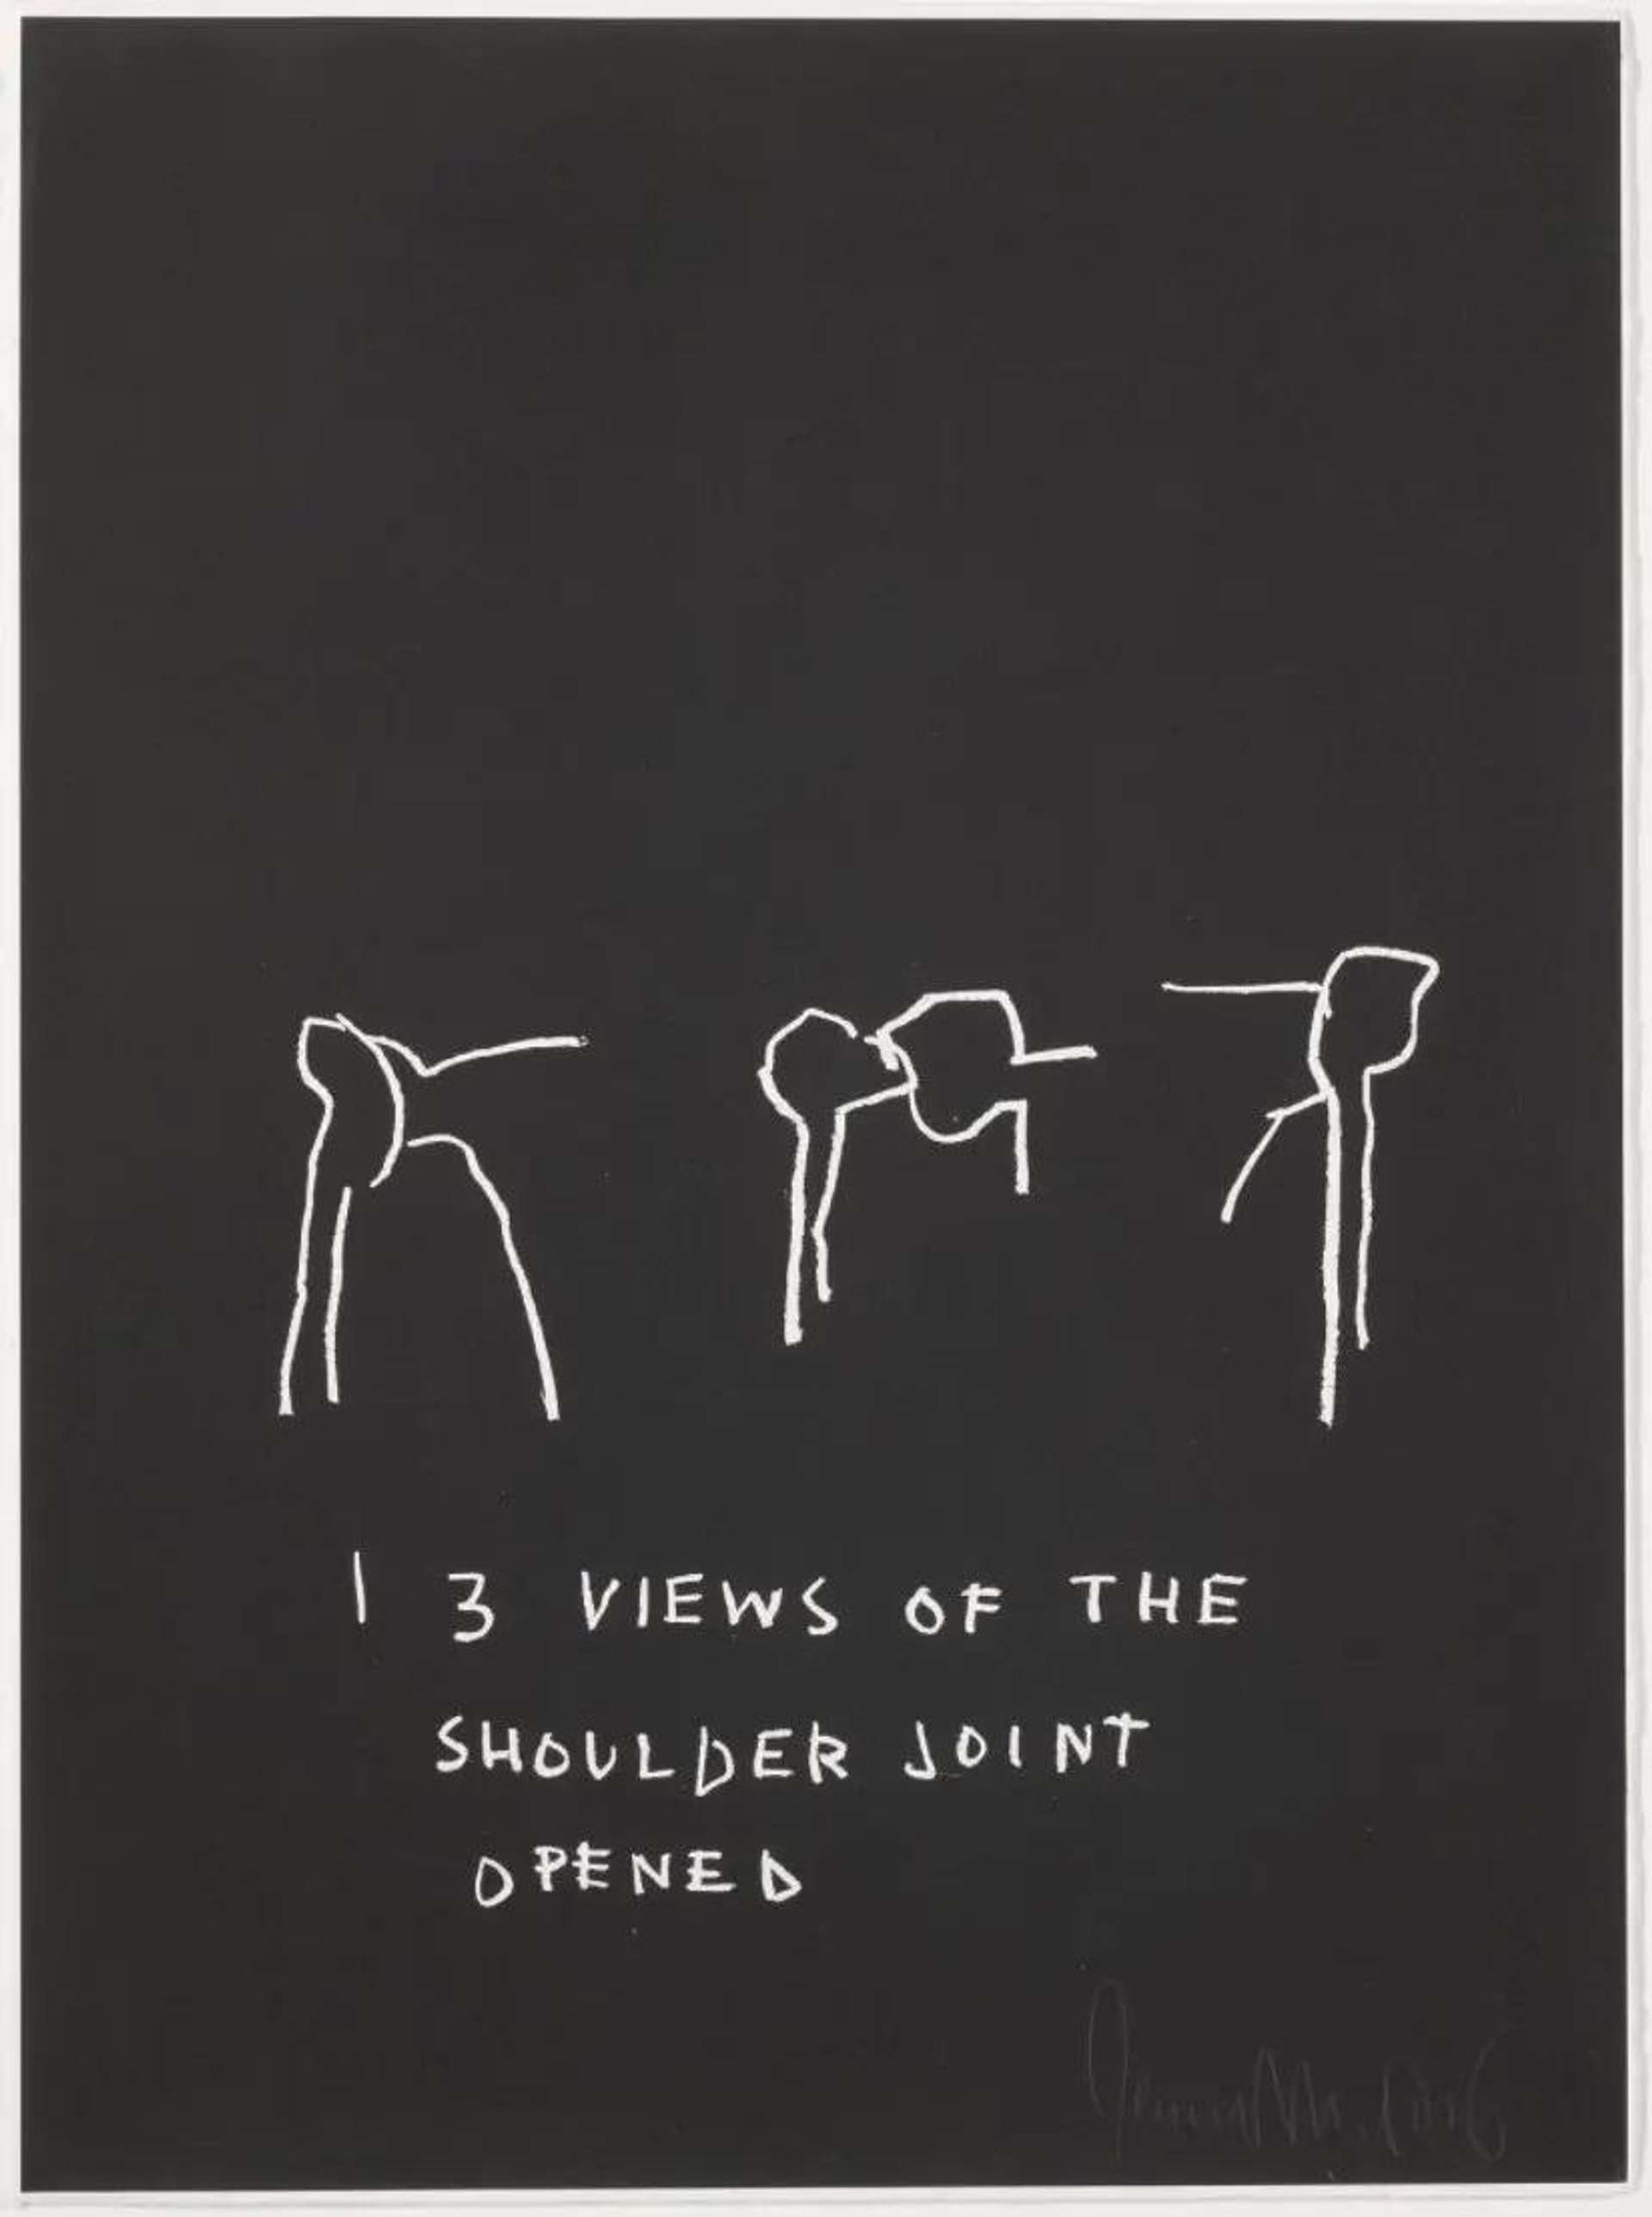 Jean-Michel Basquiat’s Anatomy, 3 Views Of The Shoulder Joint Opened. A black screenprint featuring white drawings of a human shoulder joint with descriptive labels.